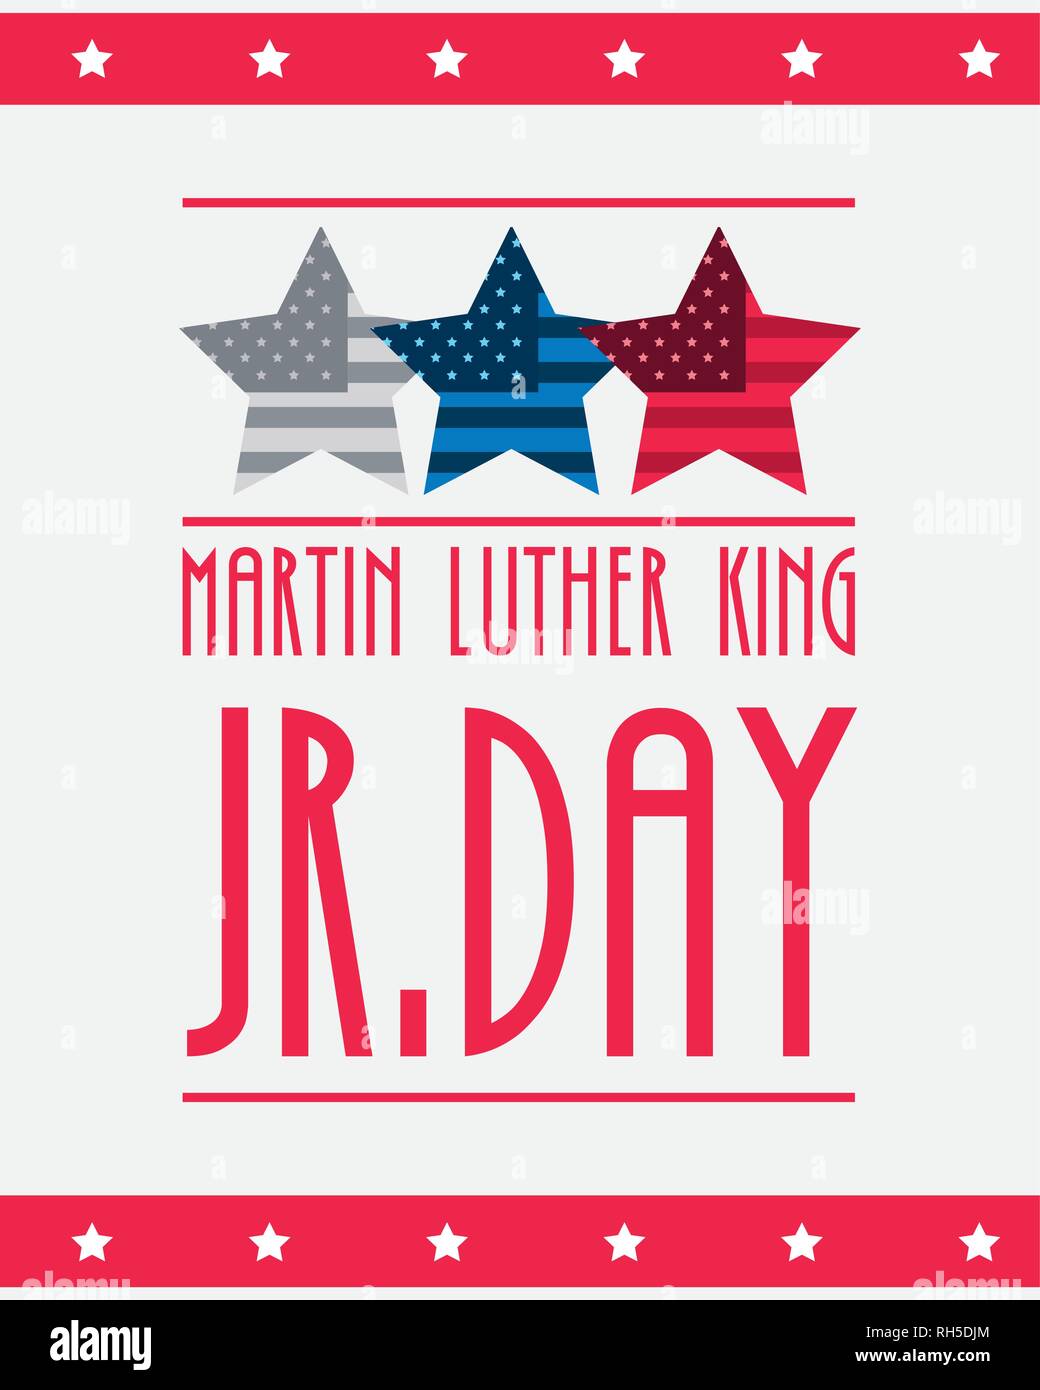 Martin Luther King Jr Day Clip Art Images - Wiki Pedia Martin Luther ...